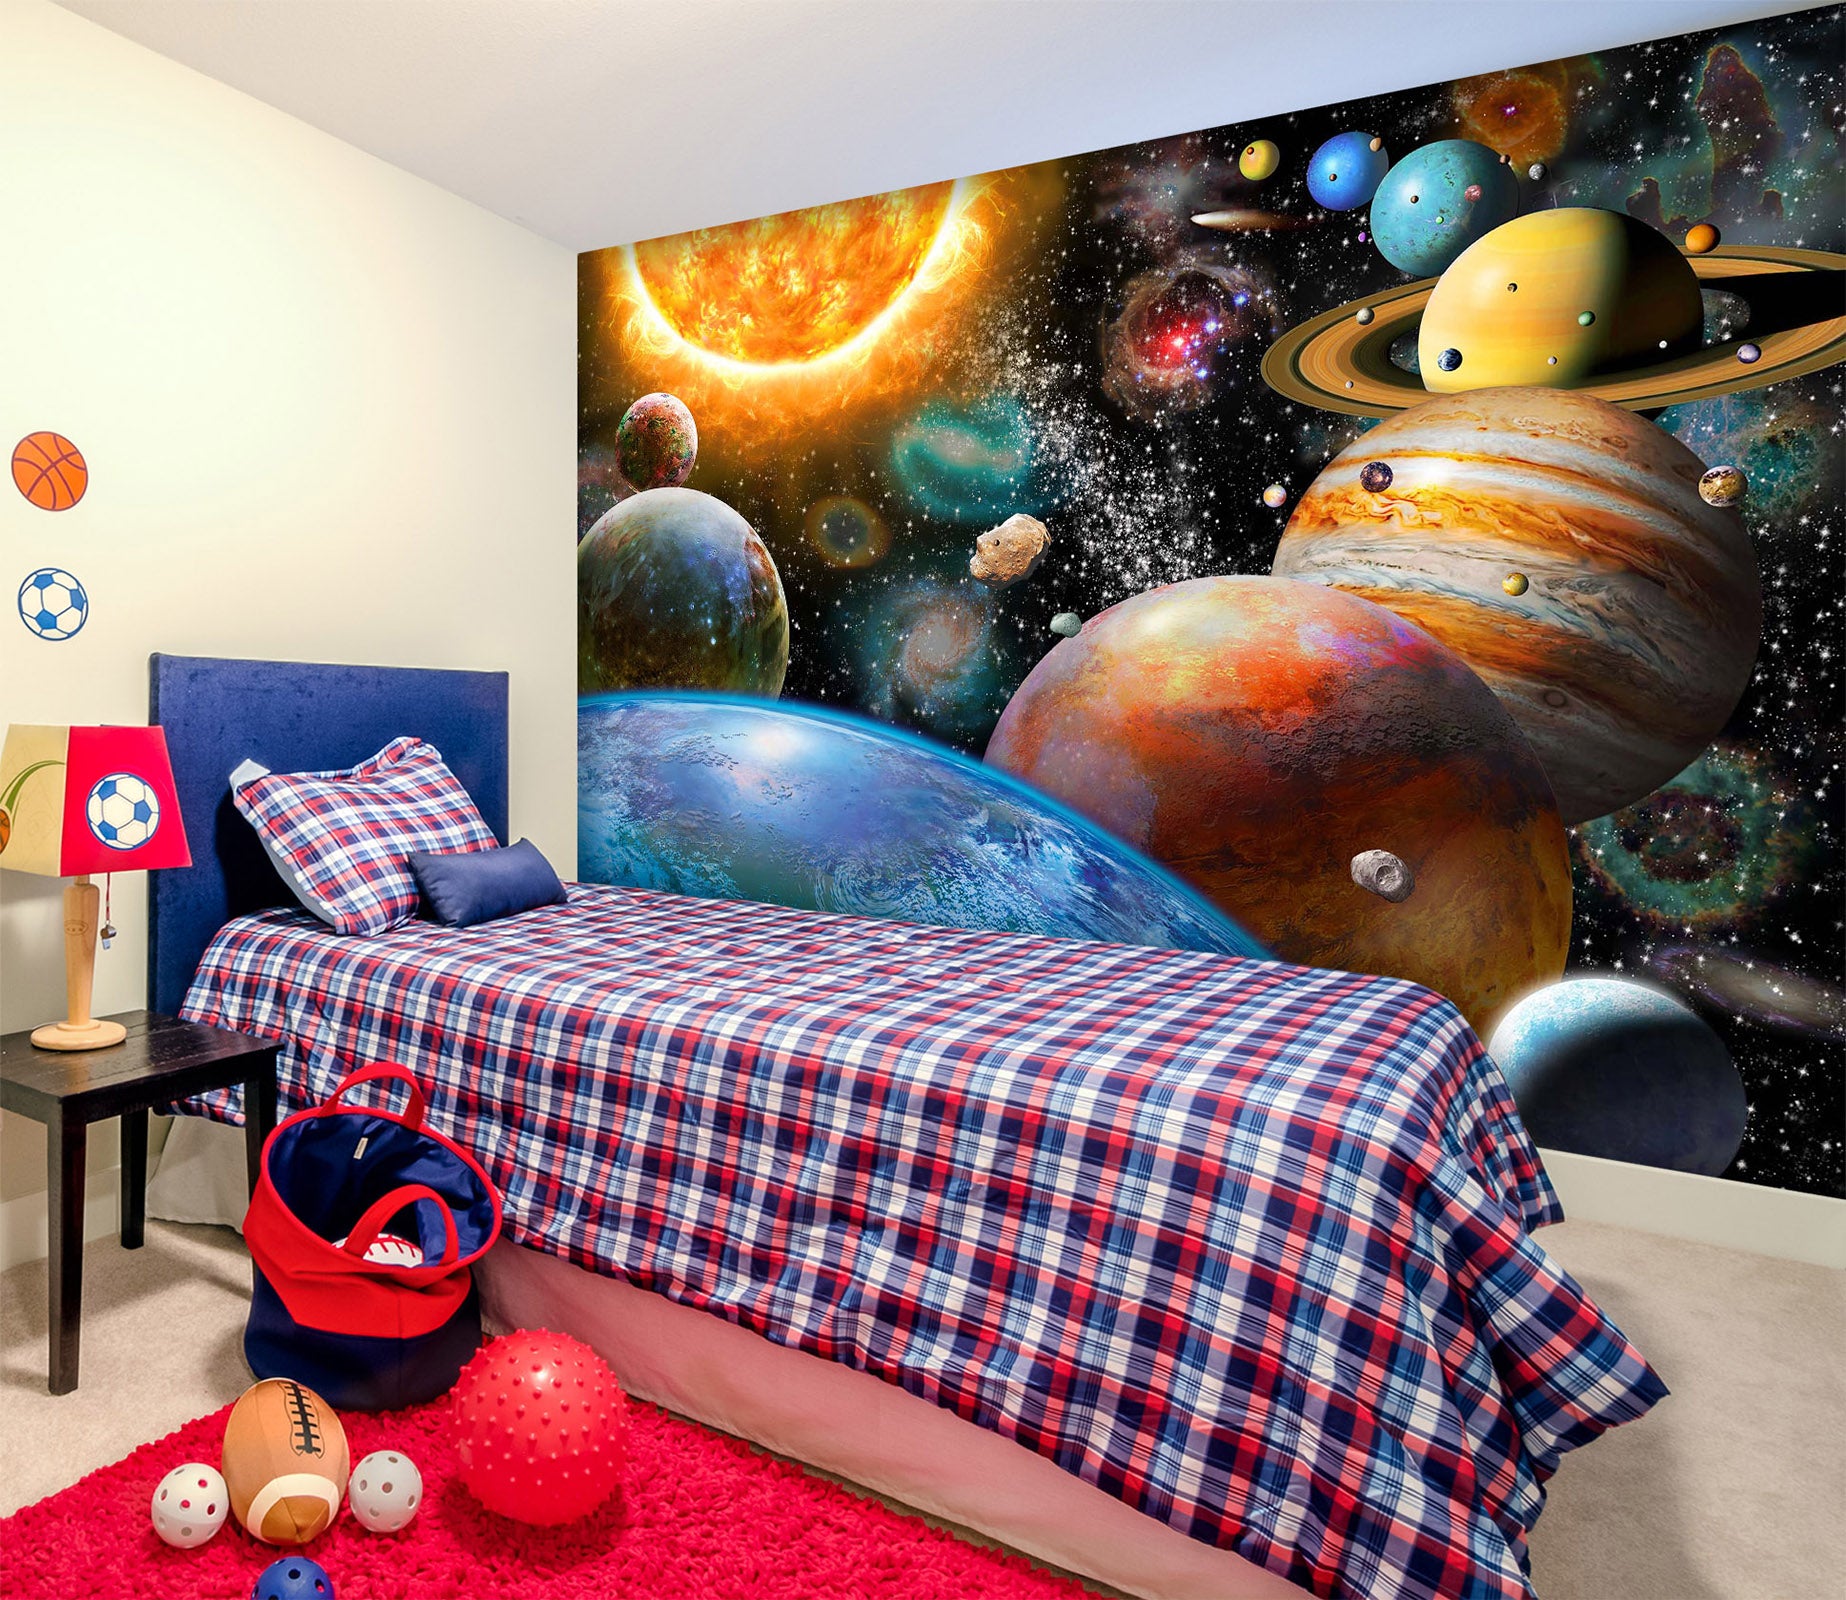 3D Color Planet 1405 Adrian Chesterman Wall Mural Wall Murals